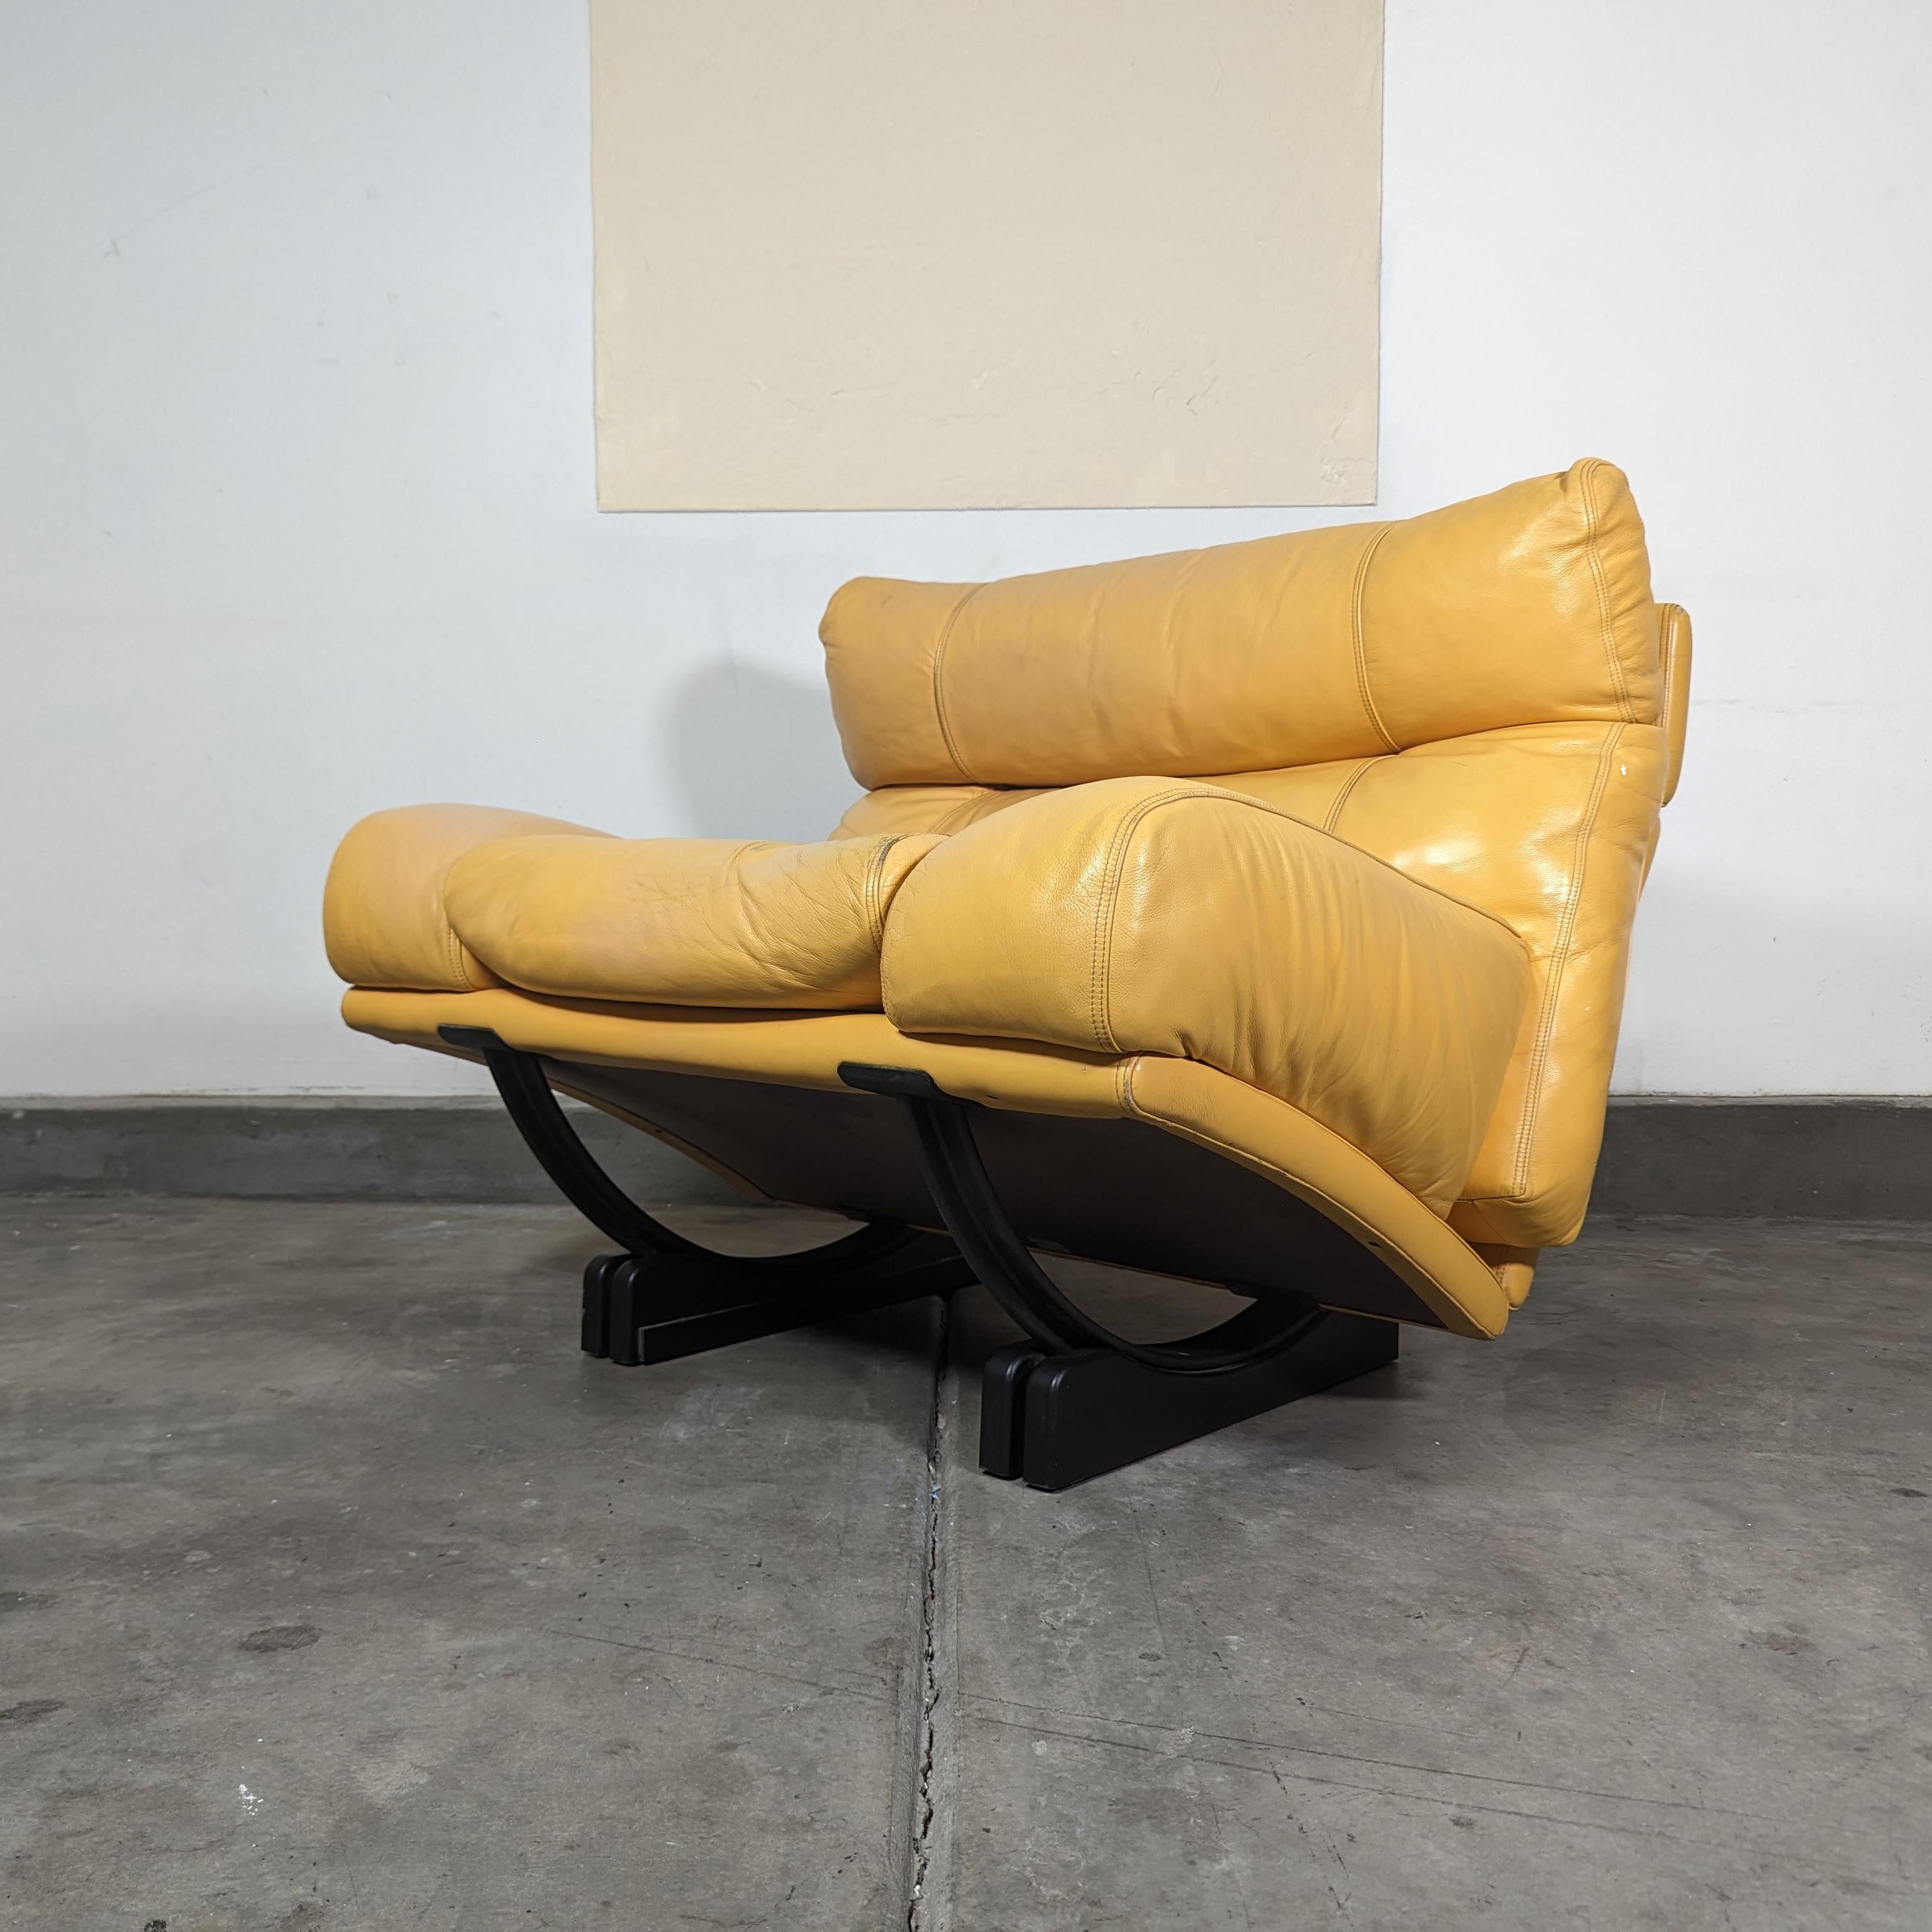 Postmodern Walse Leather Lounge Chair by Tito Agnoli for Poltrona Frau, c1990s For Sale 5